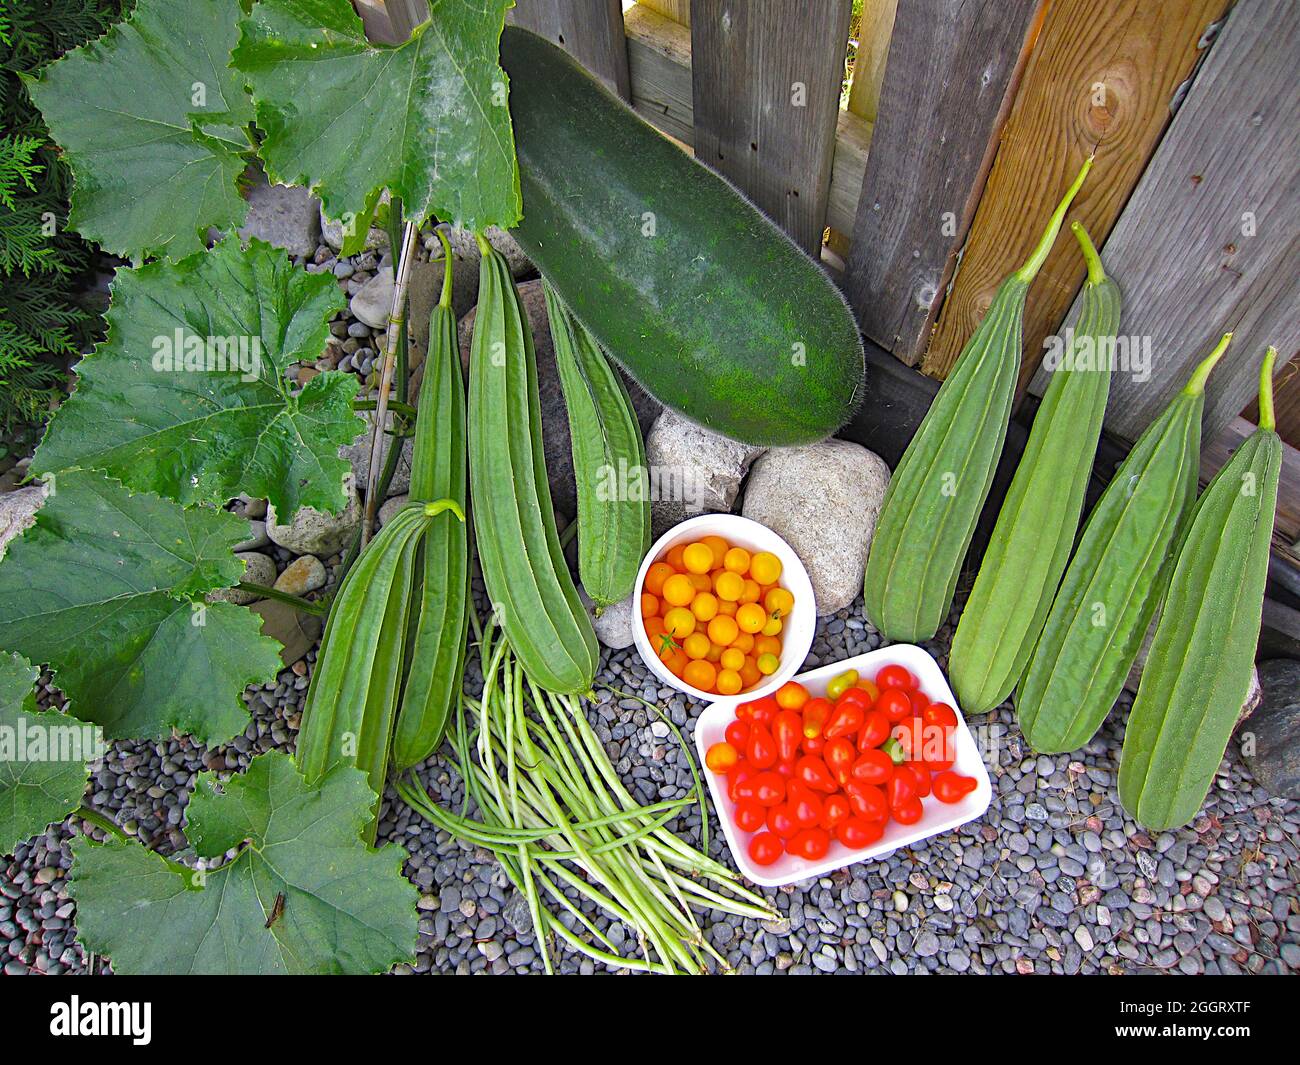 Variety of garden vegetables tomato, long bean, fuzzy melon, and  Chinese green melon squash with garden background. Stock Photo